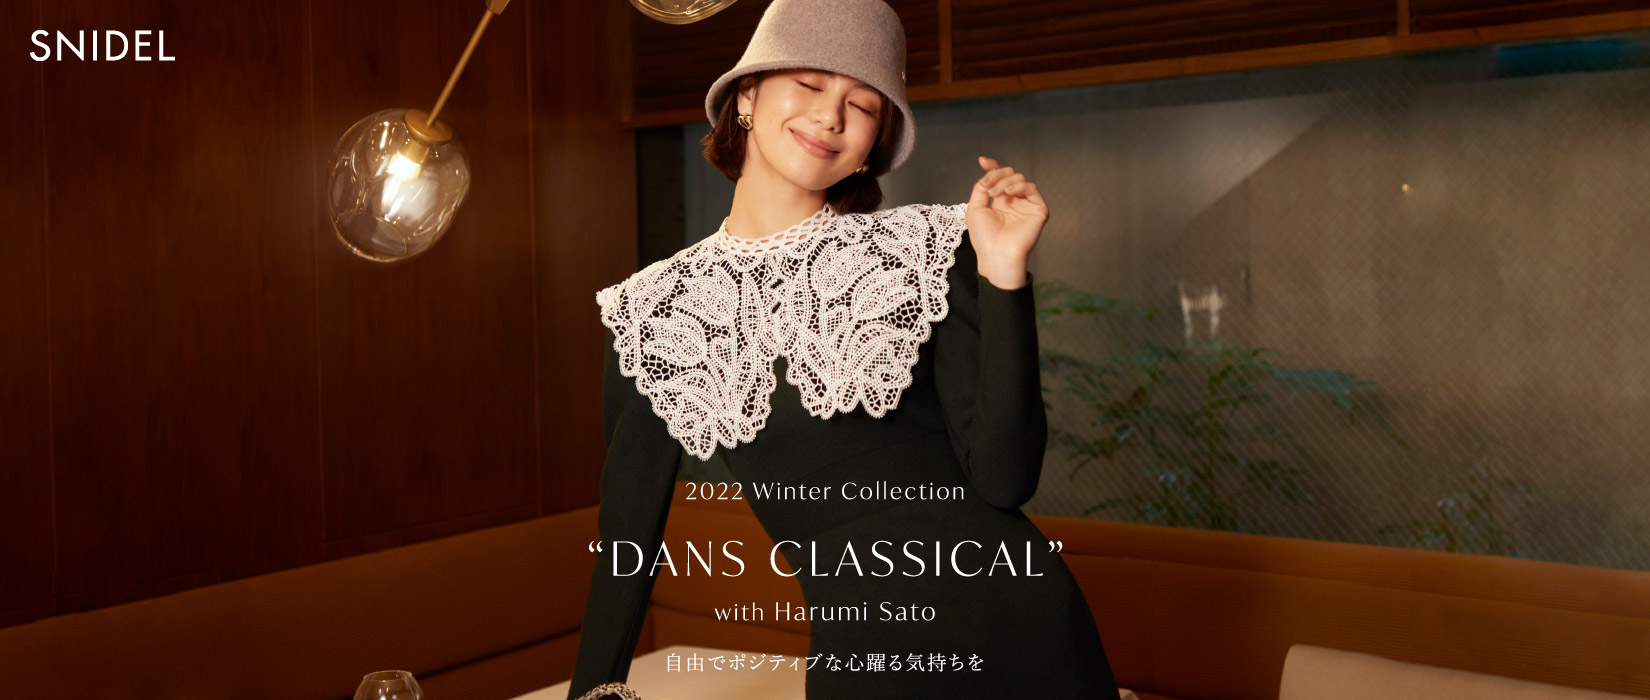 SNIDEL 2022 WINTER COLLECTION “DANS CLASSICAL” with Harumi Sato